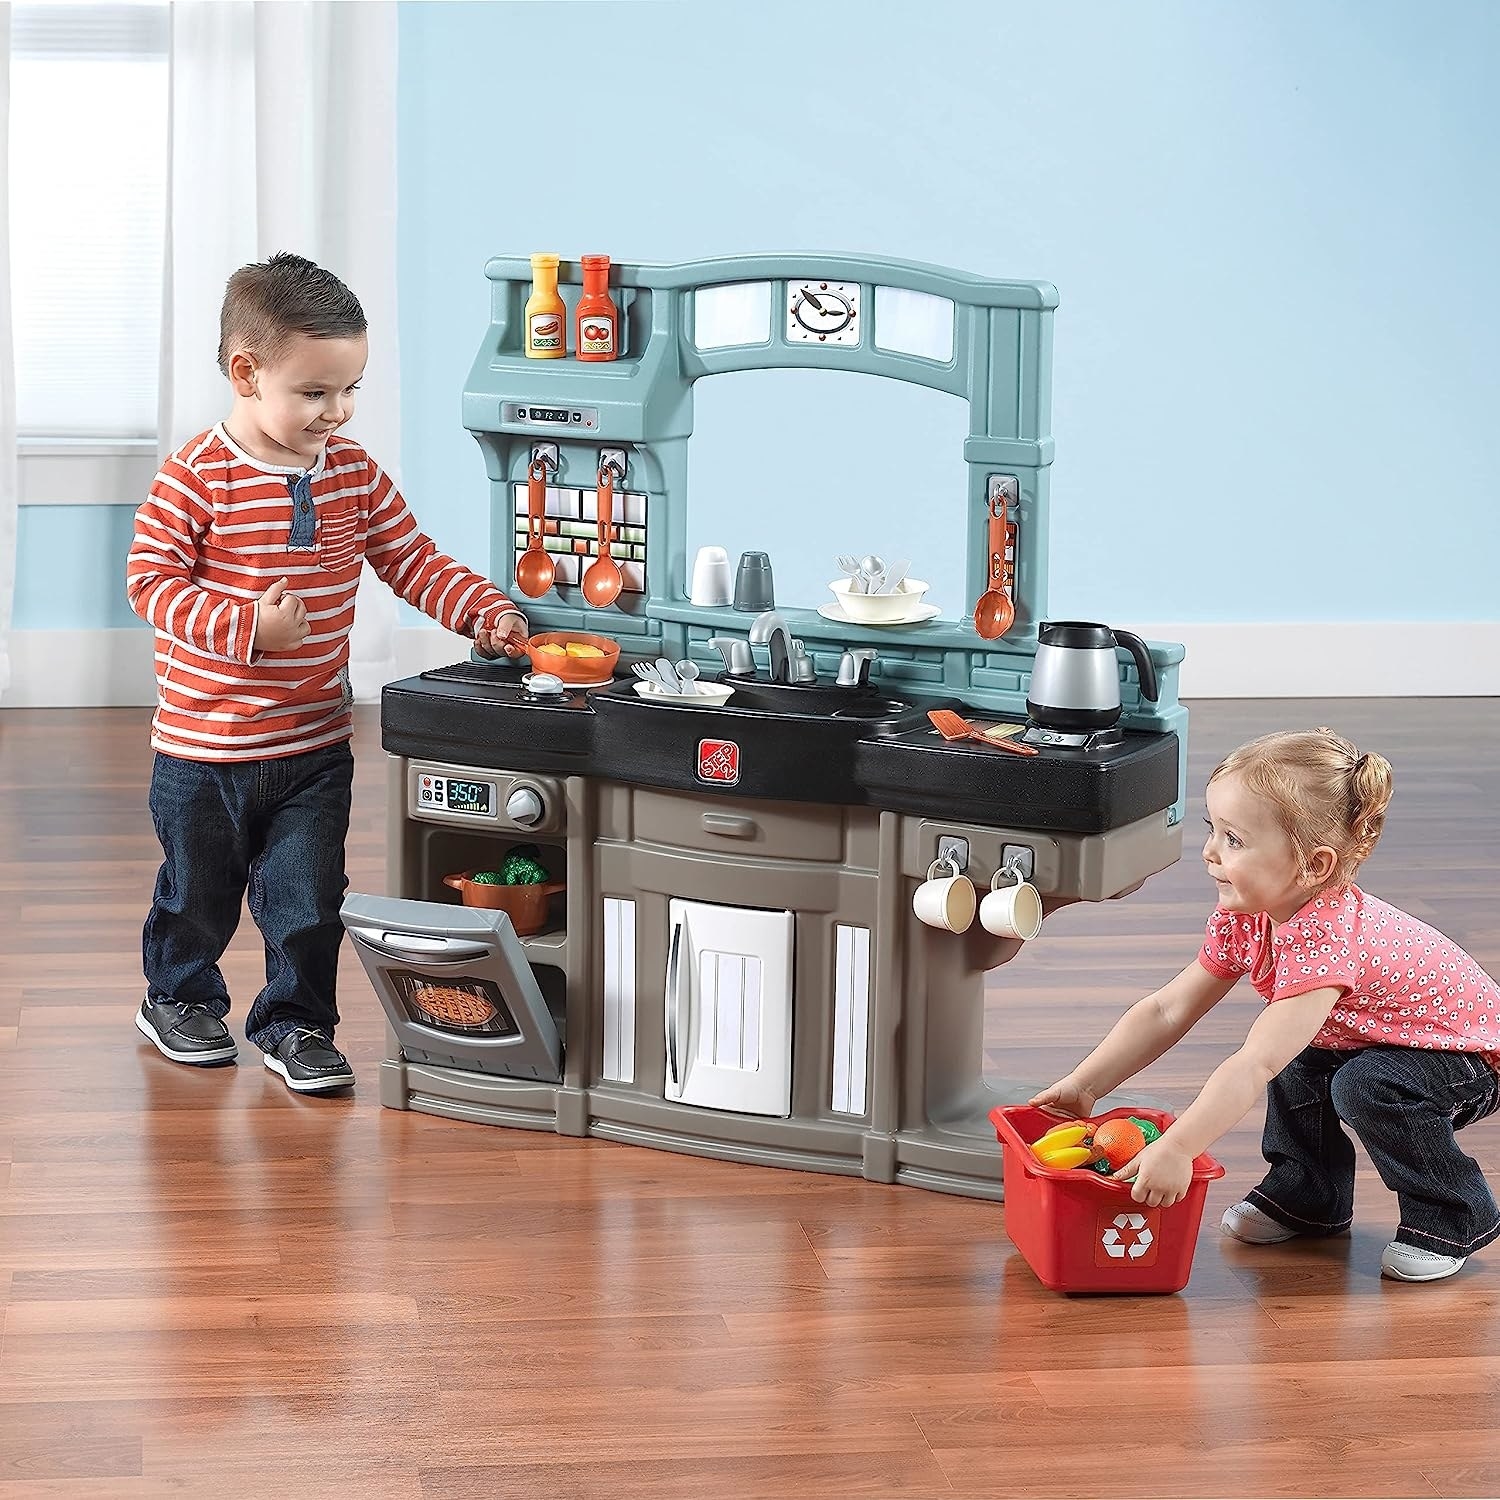 Two child models playing in and around plastic kitchen play set